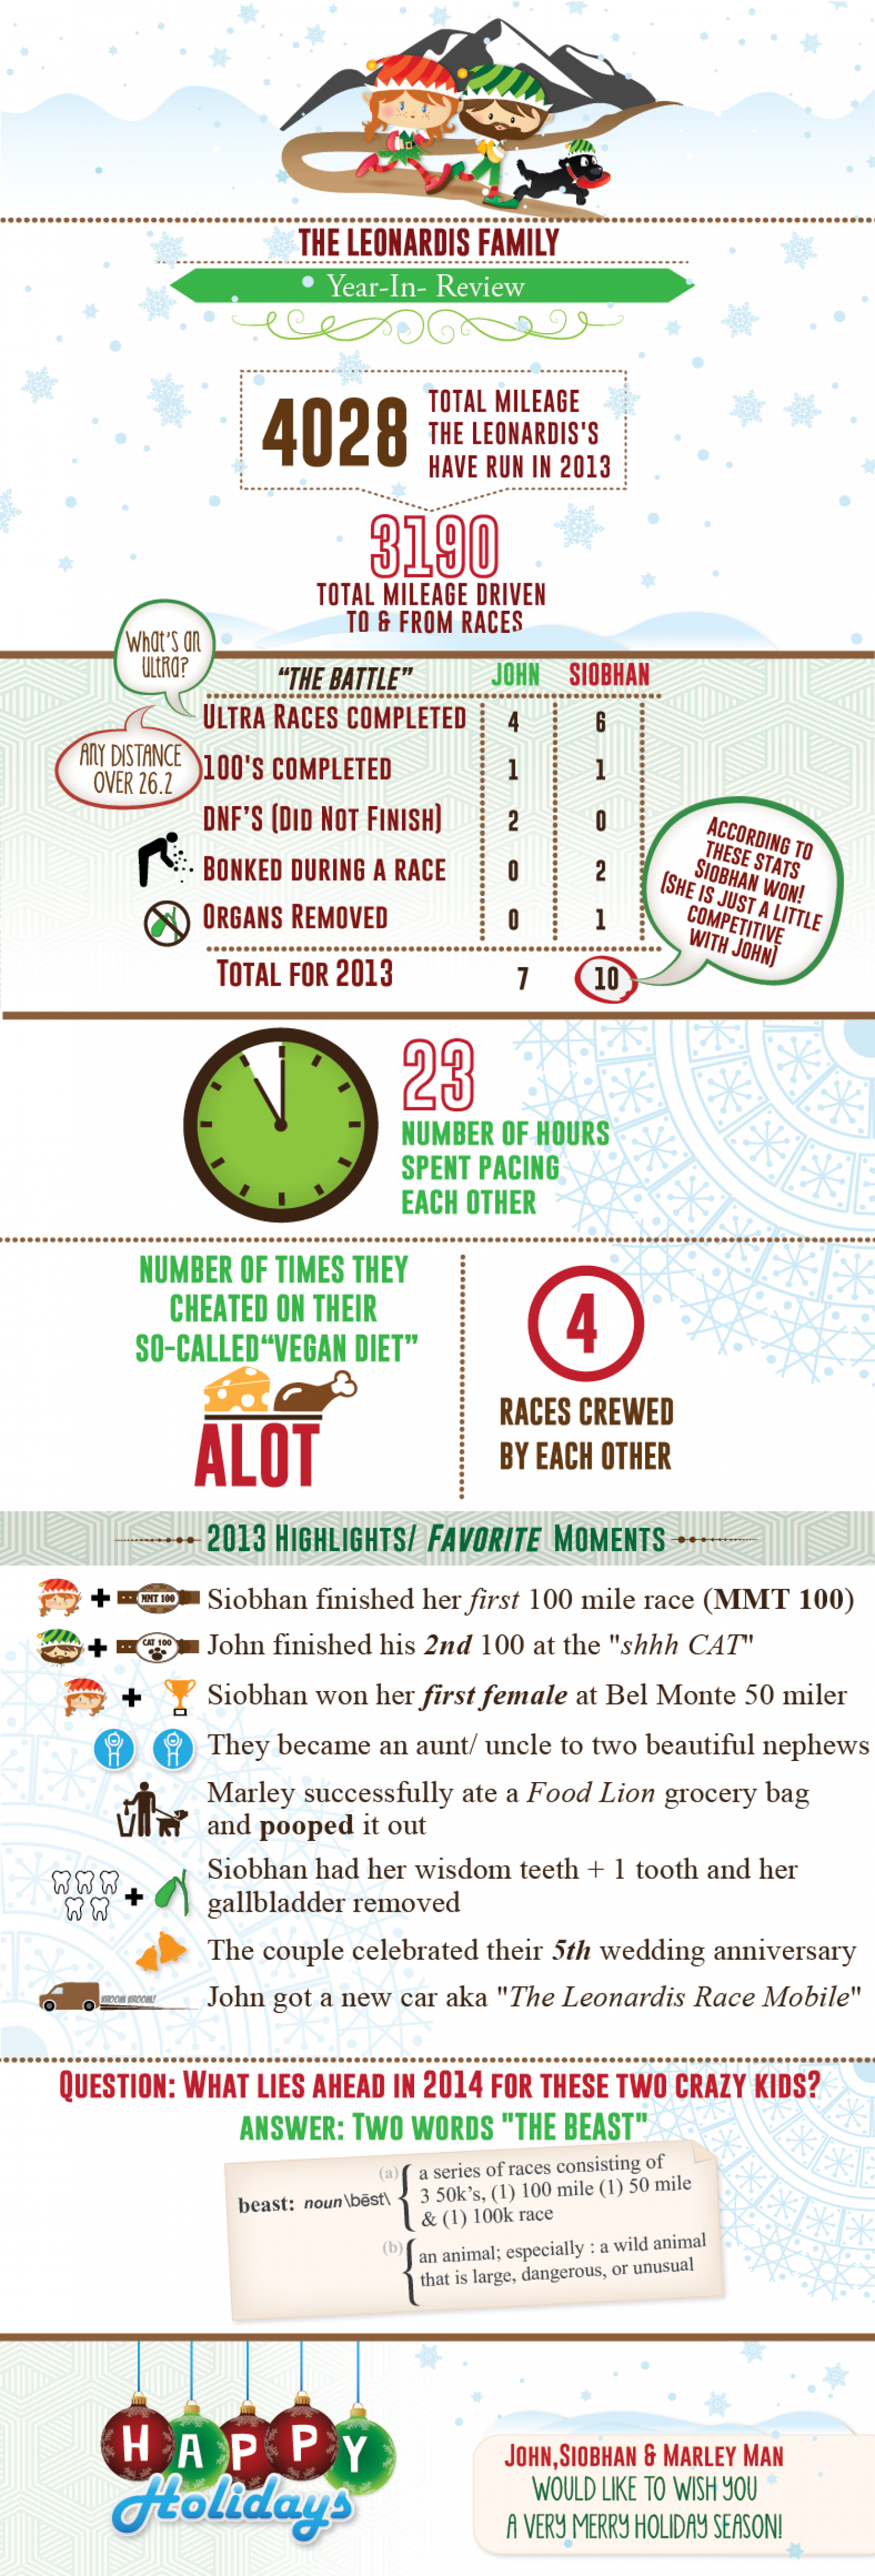 Entertainment Infographic: 2013 Year in Review